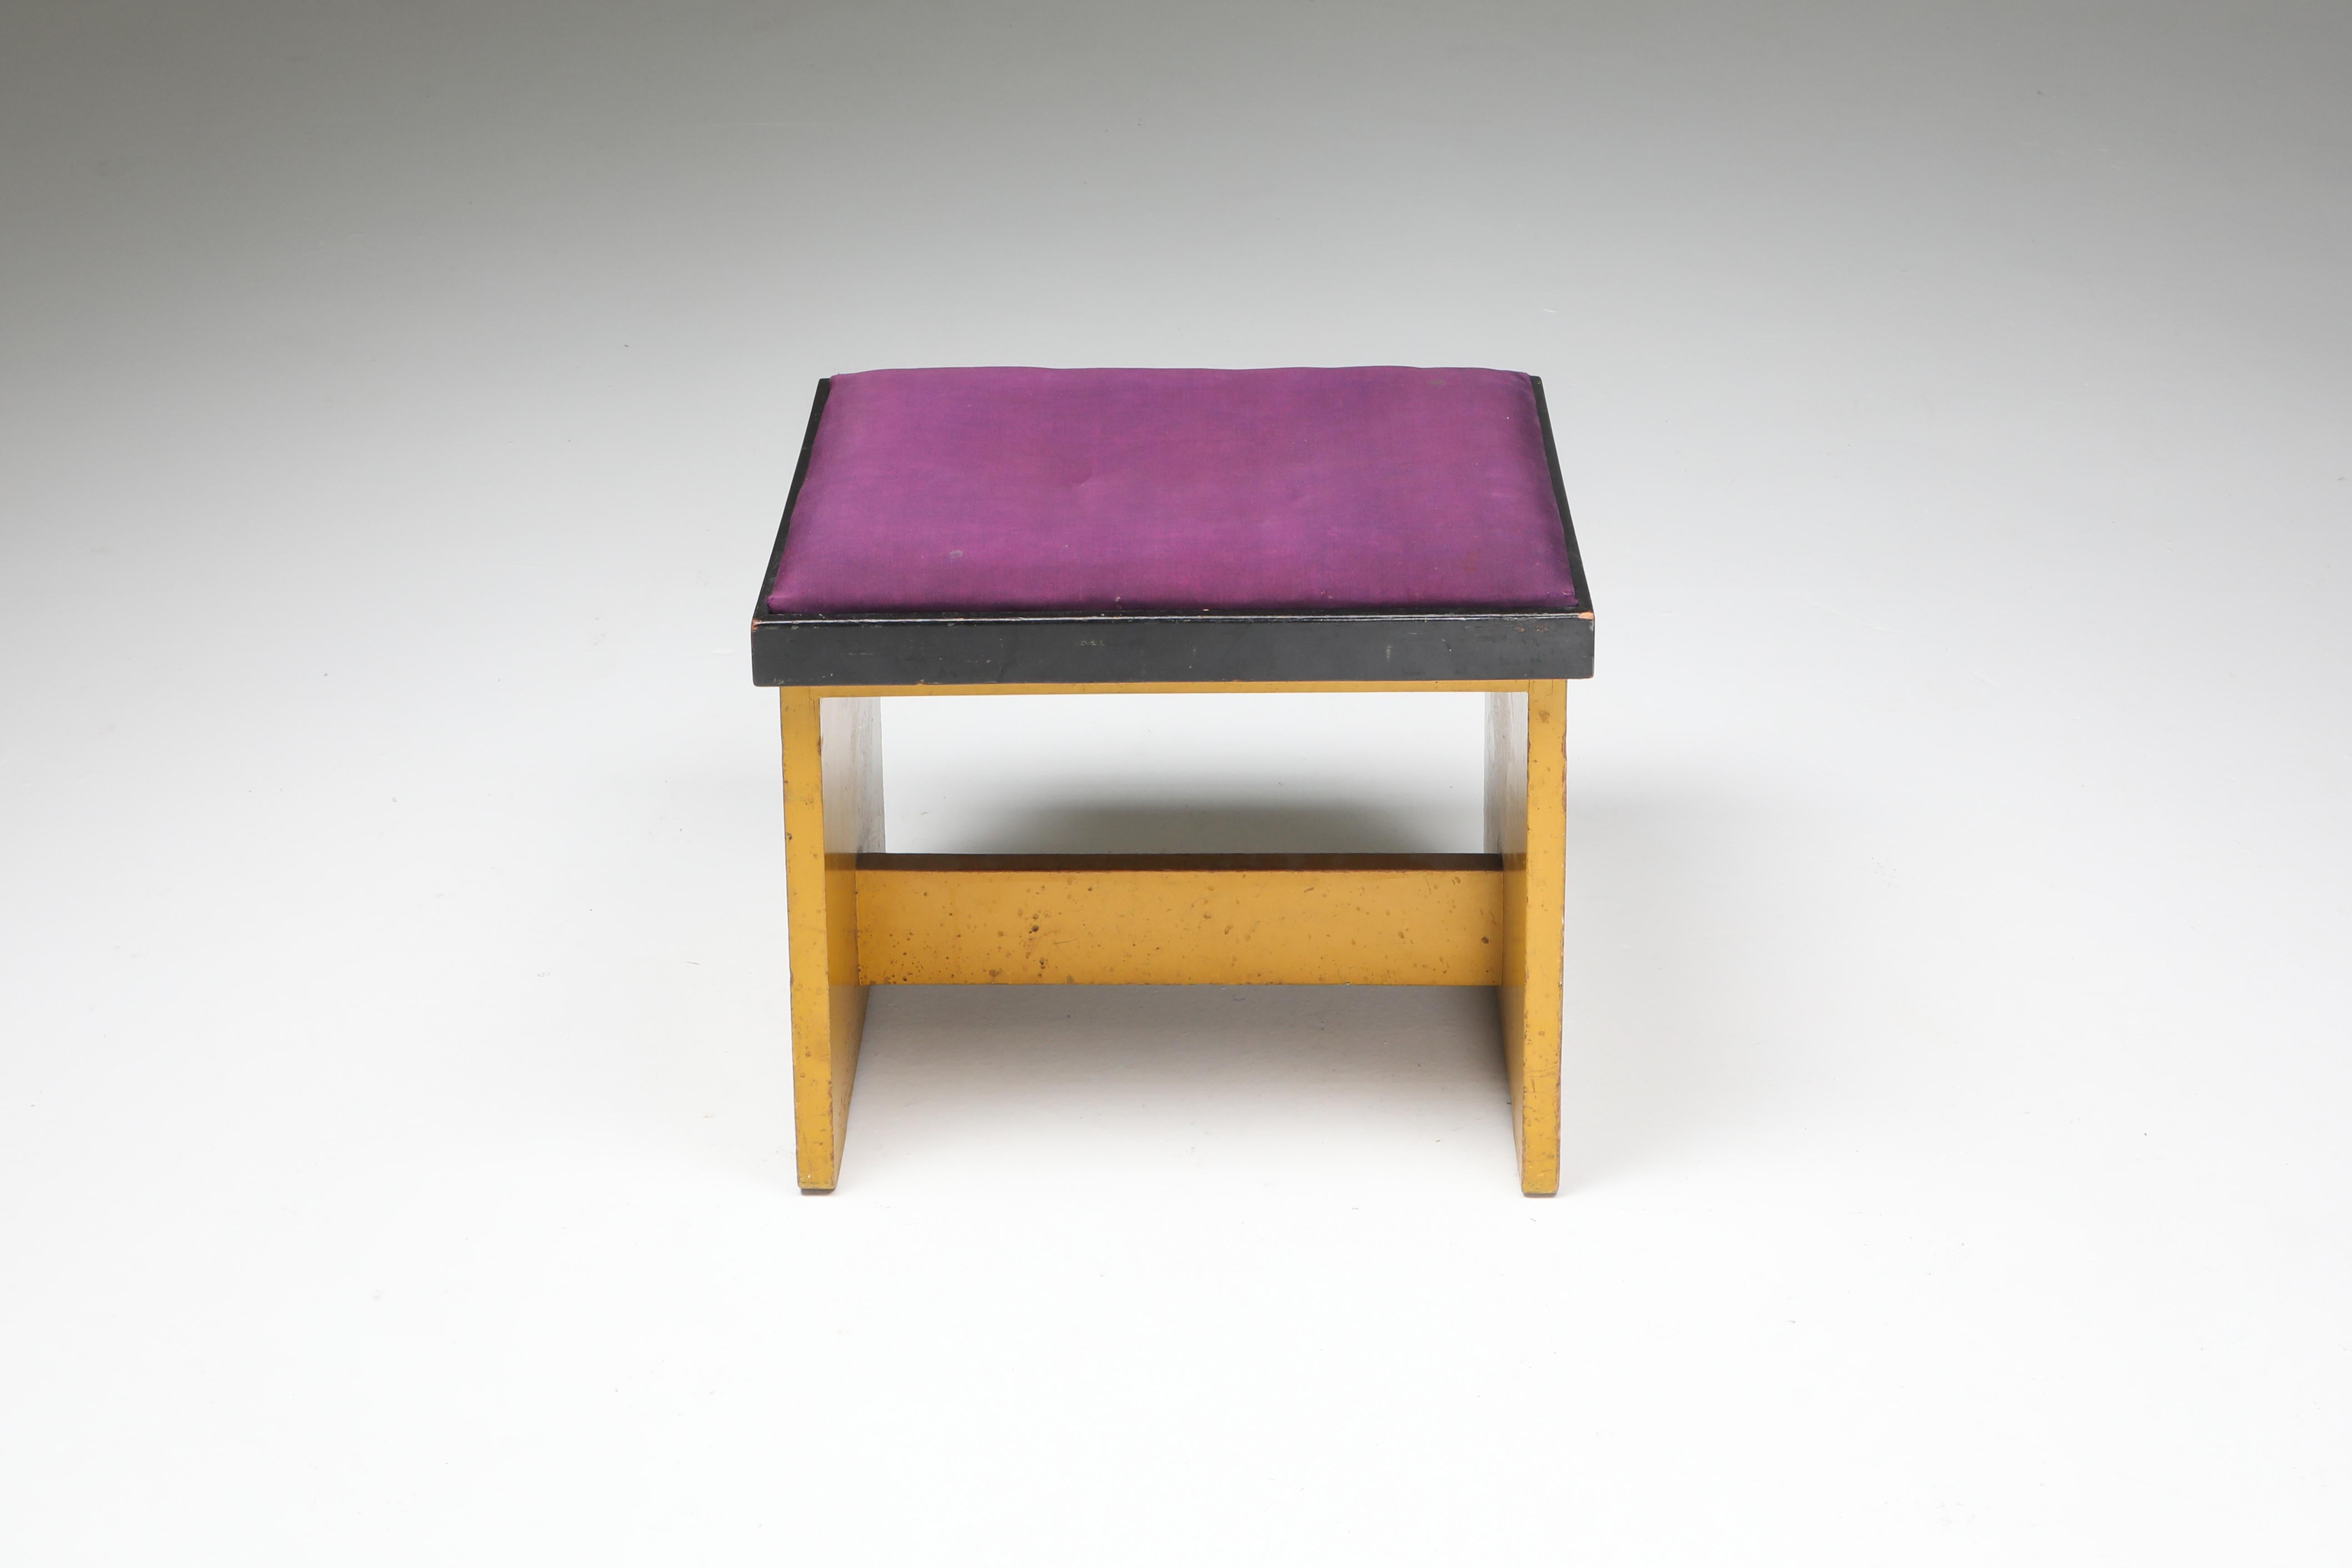 Dutch Modernist Stool by H. Wouda, 1924 For Sale